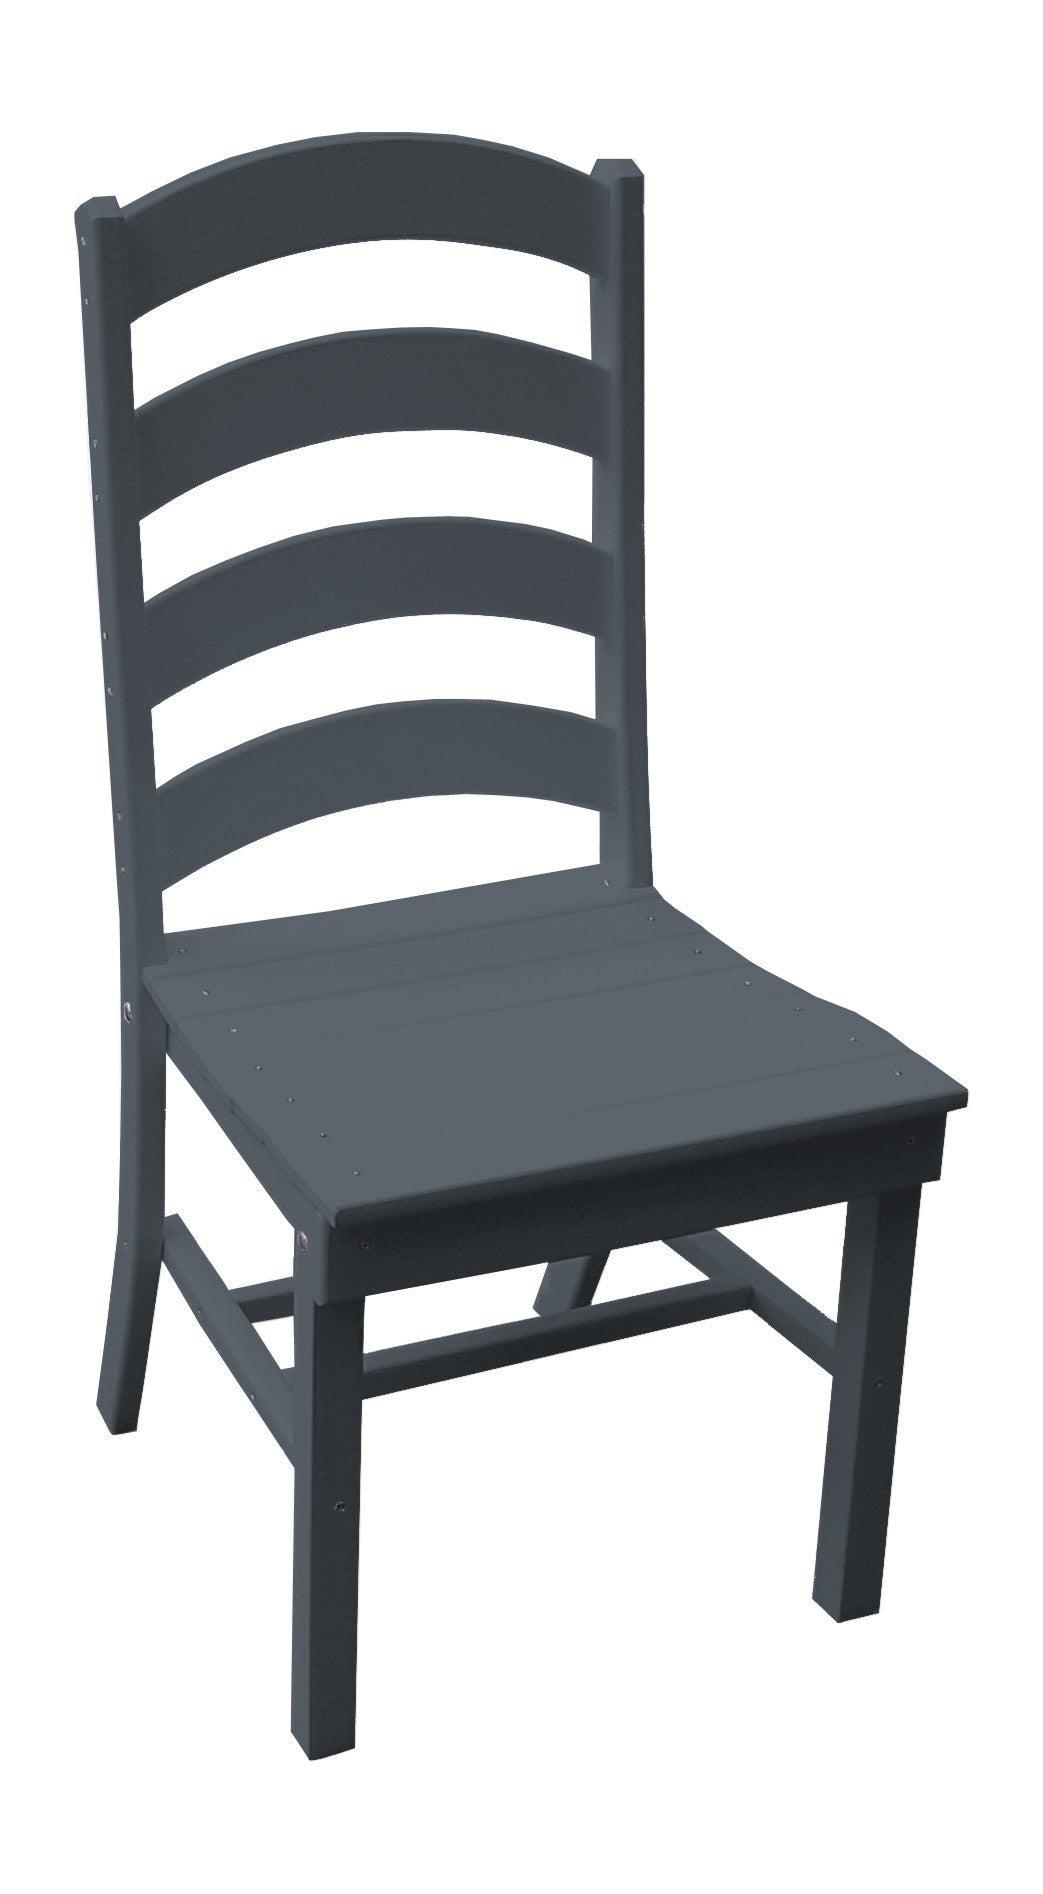 A&L Furniture Company Recycled Plastic Ladderback Dining Chair - Dark Gray